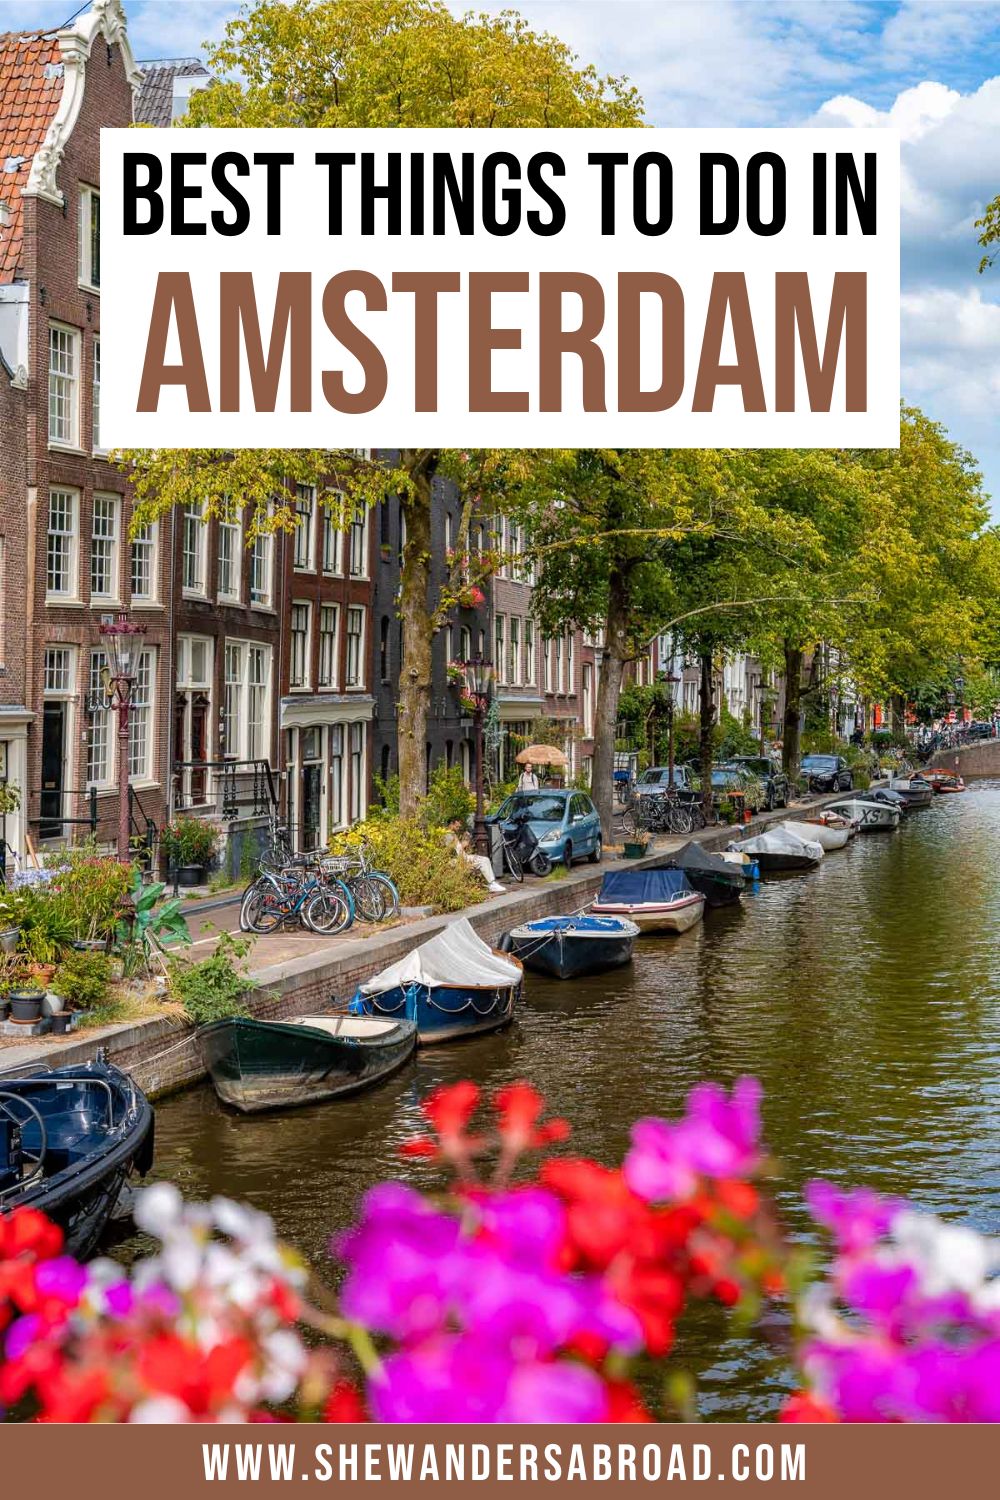 39 Best Things to Do in Amsterdam: The Ultimate Amsterdam Bucket List